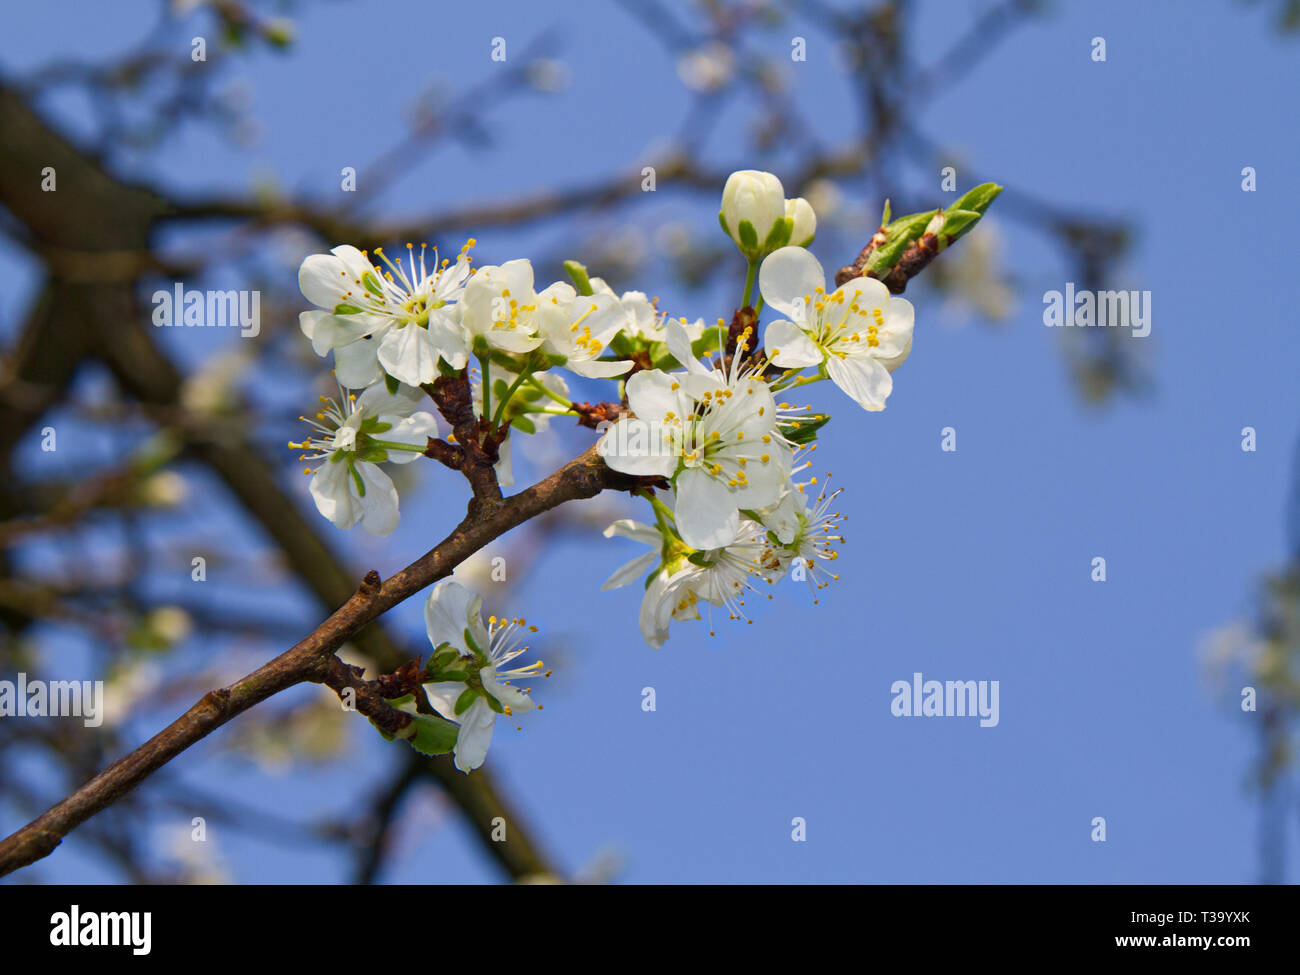 Blossom of Sour cherry tree in spring against a blue sky Stock Photo